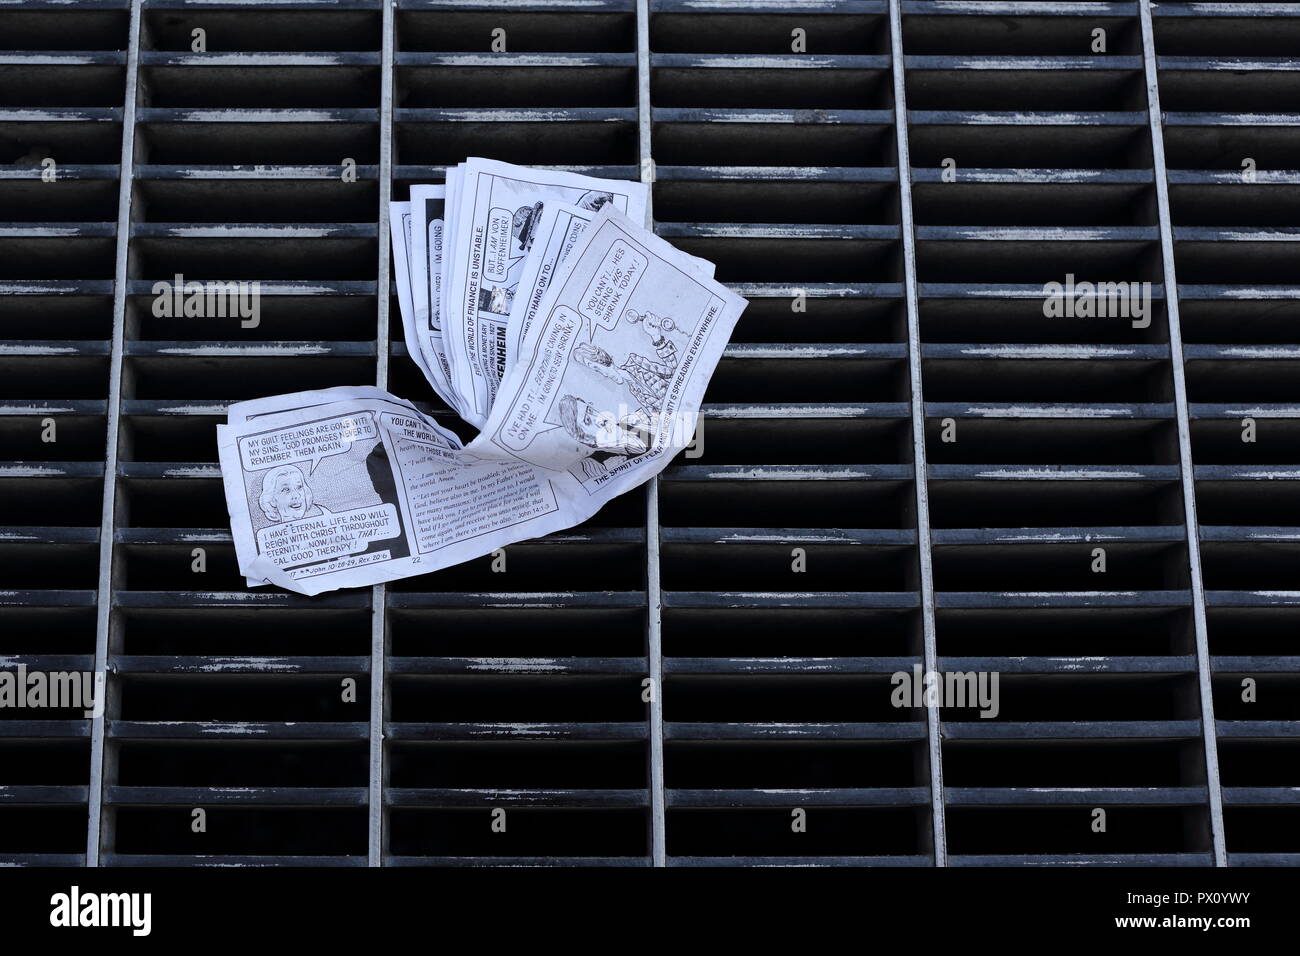 Crumpled up religious comic on street grate. Stock Photo